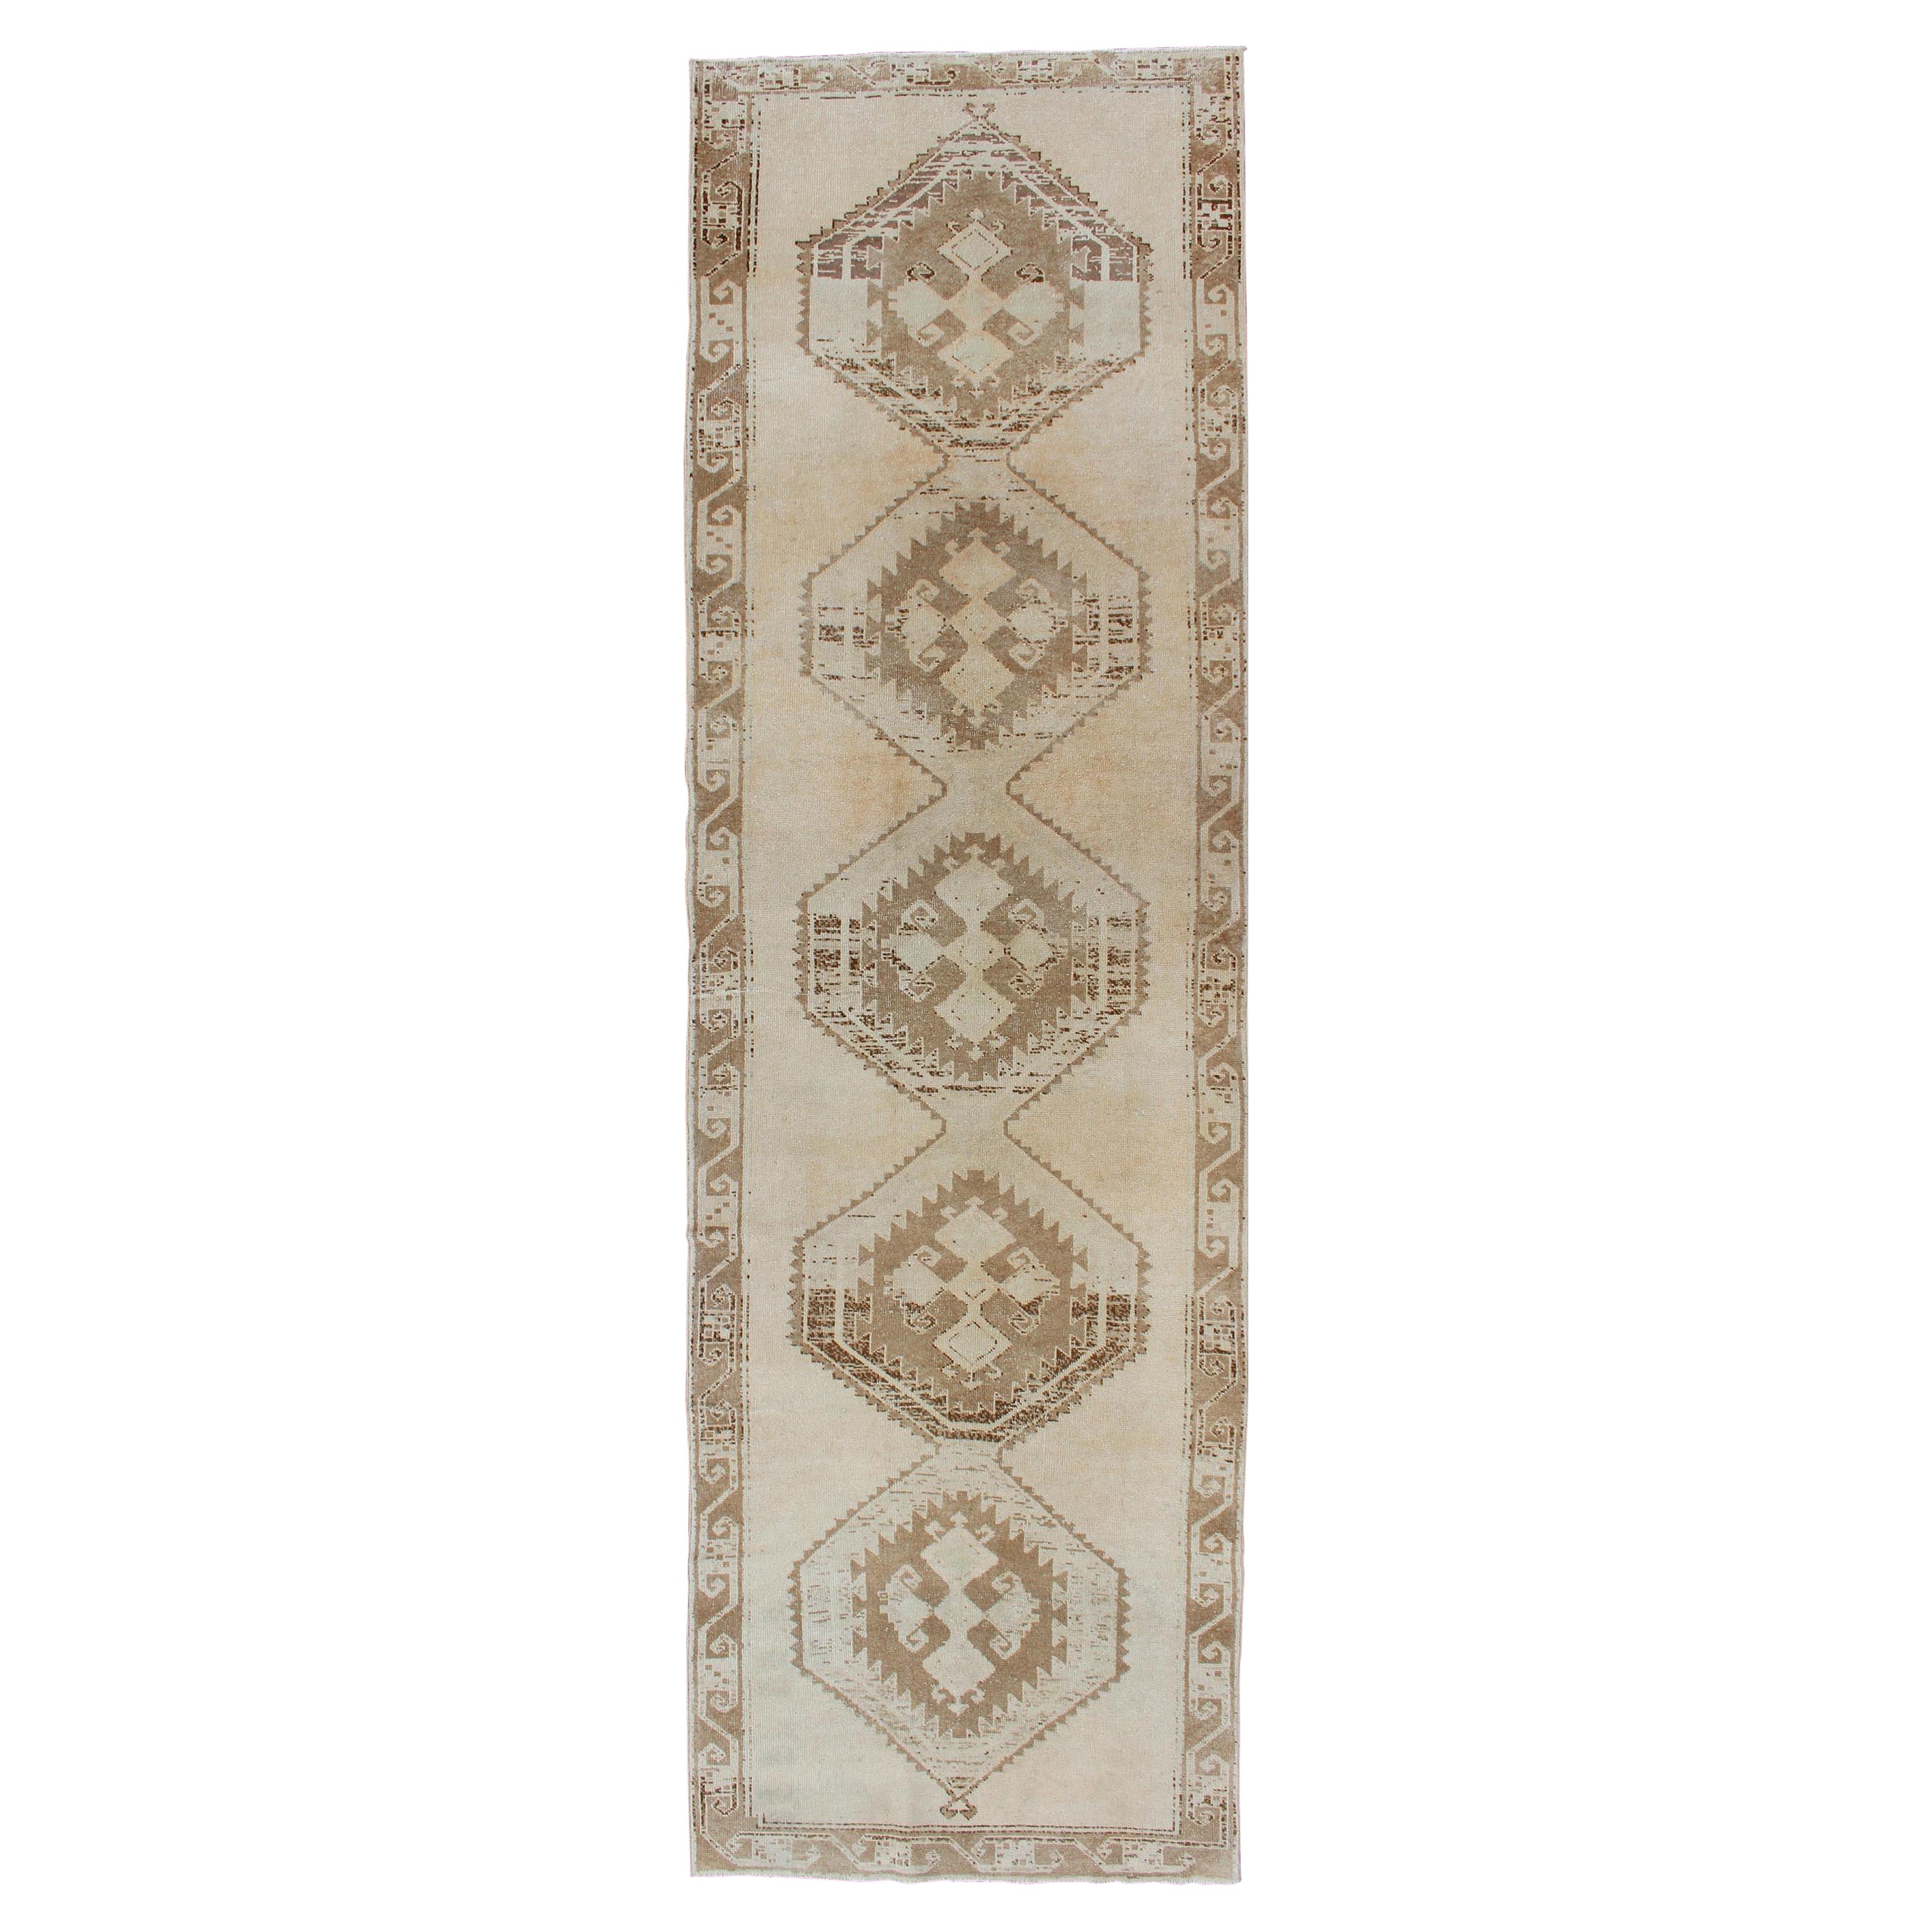 Light Colored Vintage Oushak Gallery Runner with Geometric Medallions